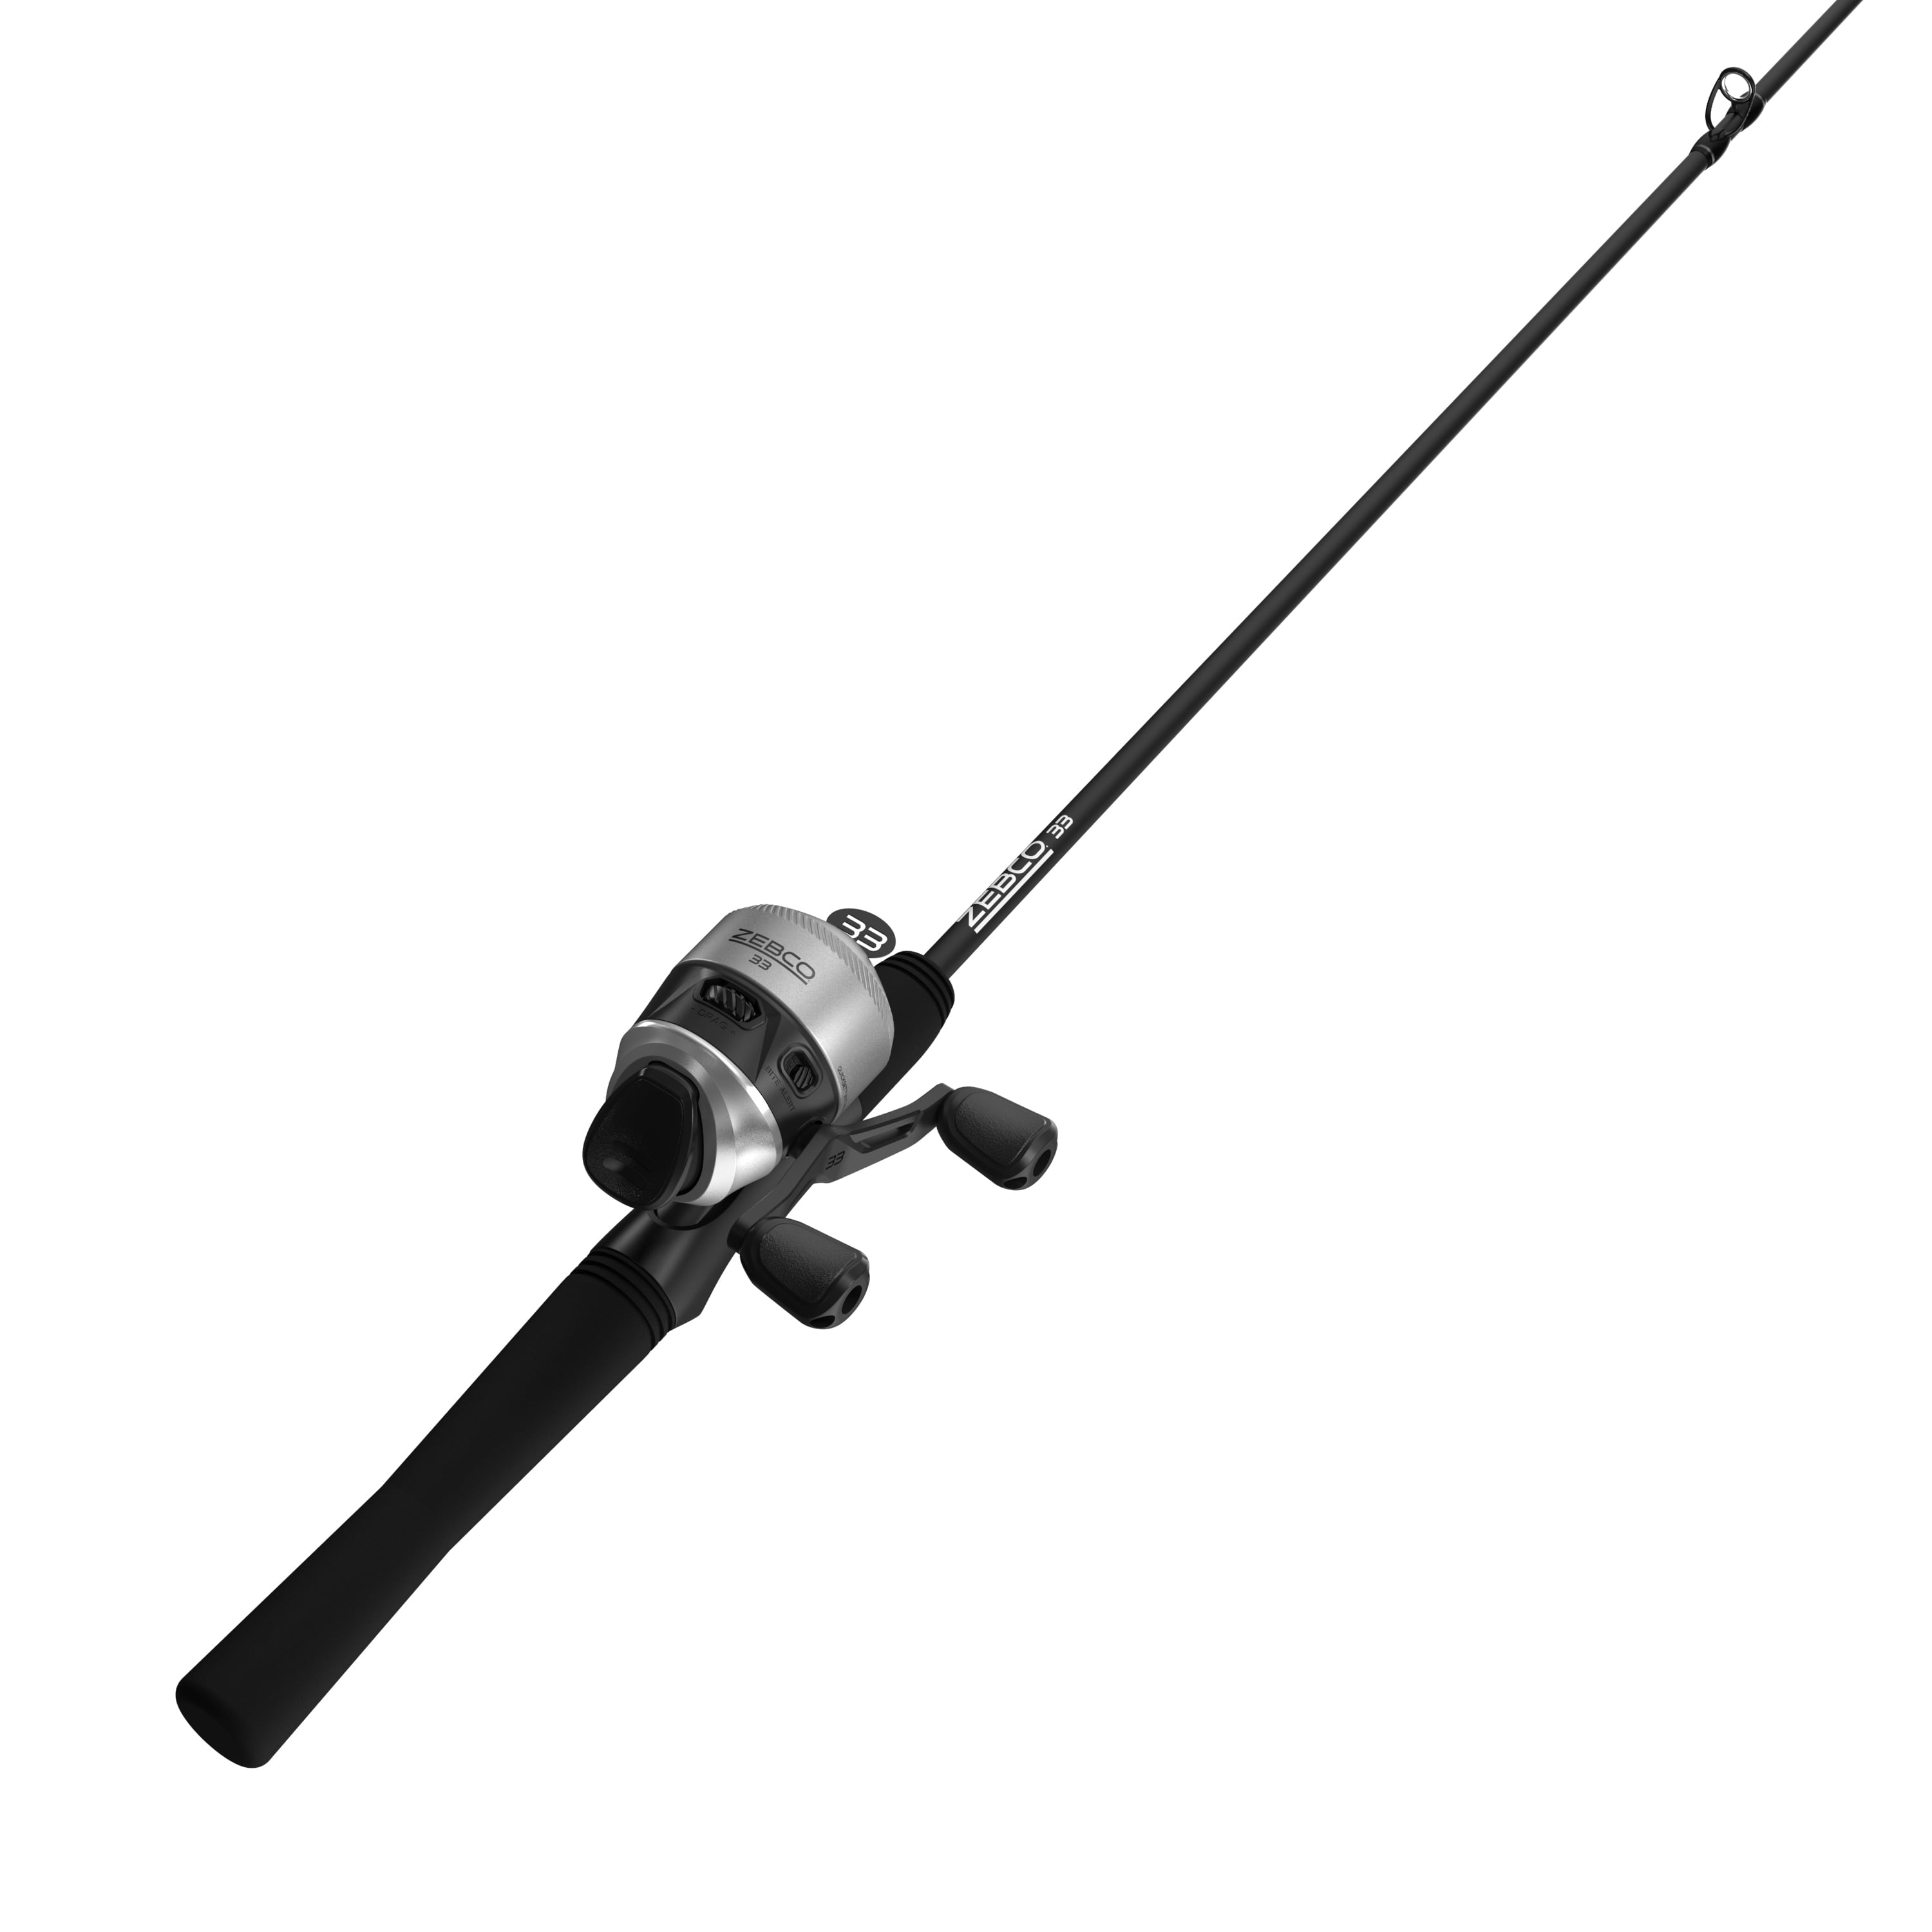 New Zebco Bullet Spincasting Rod and Reel Fishing Combo 6'6 MD 7' MH 